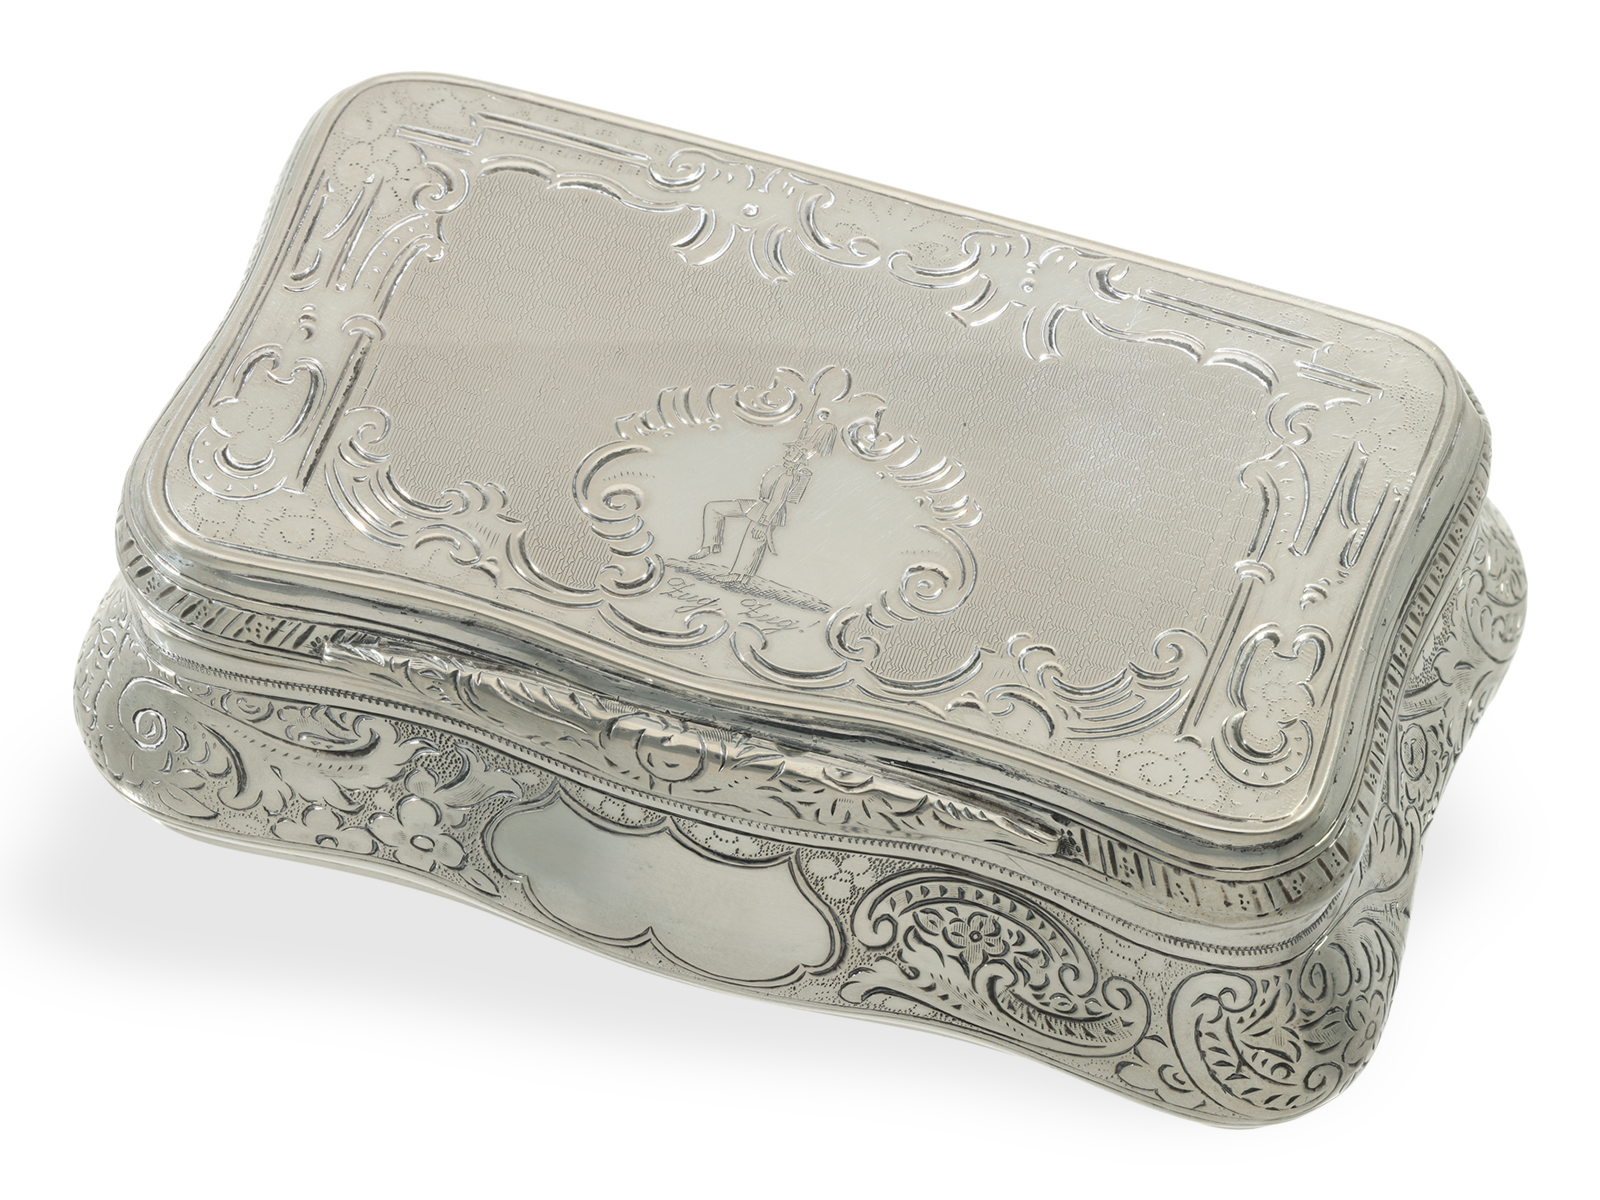 Snuff box: very fine box from around 1815 from an officer's possession - Image 2 of 5